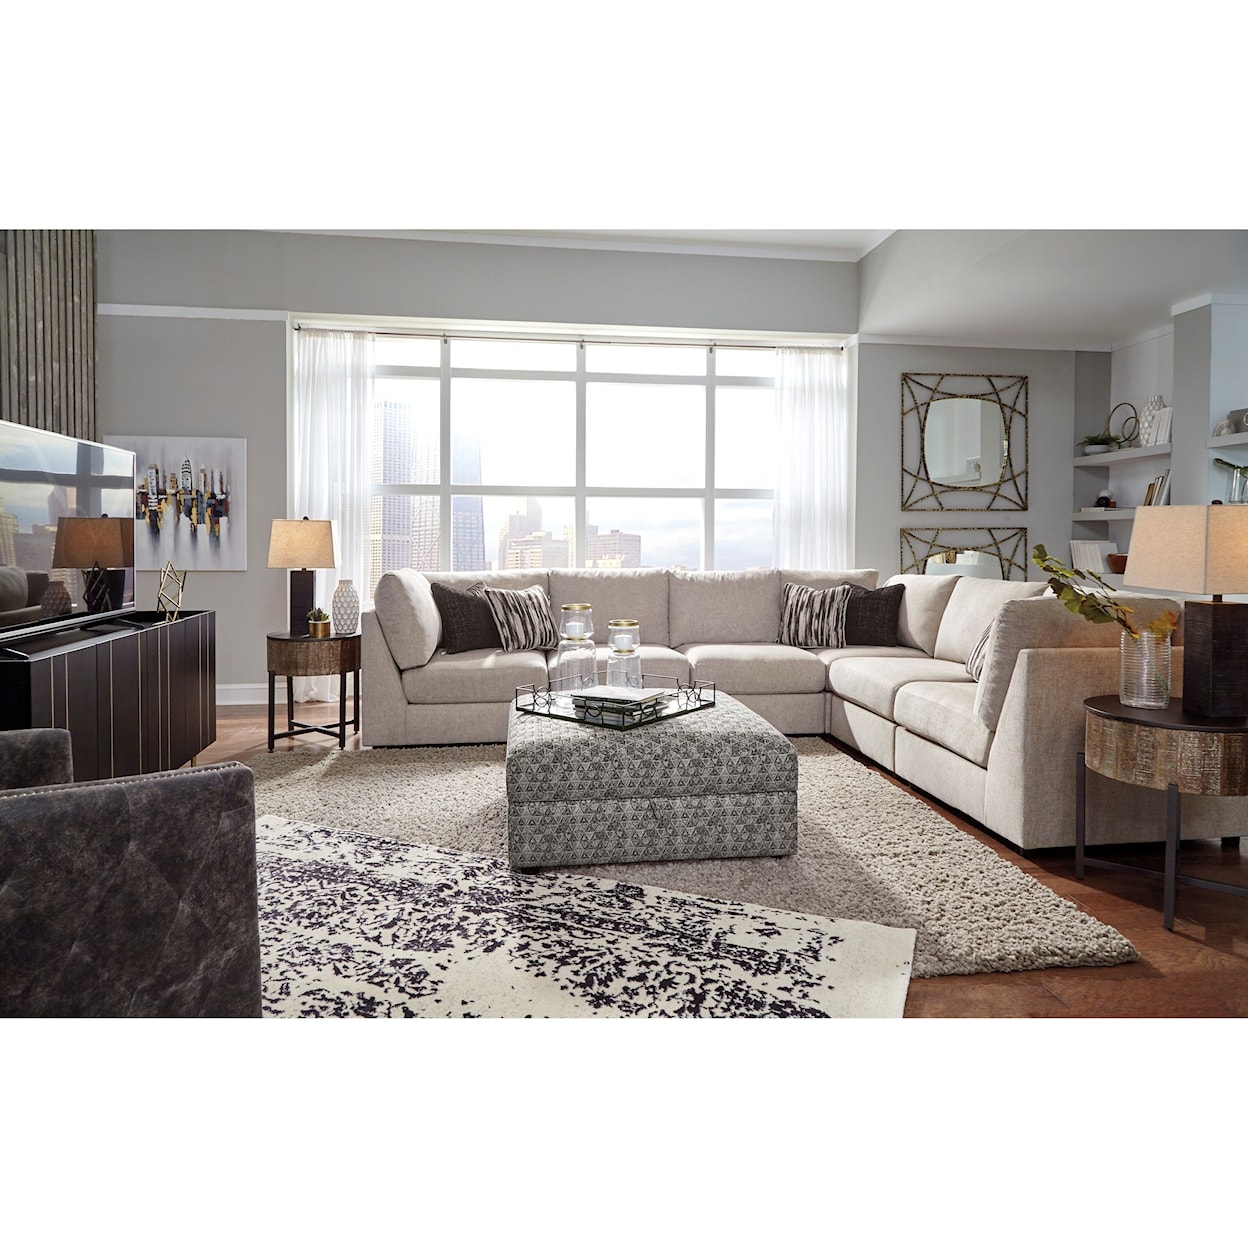 Signature Design by Ashley Kellway Living Room Group